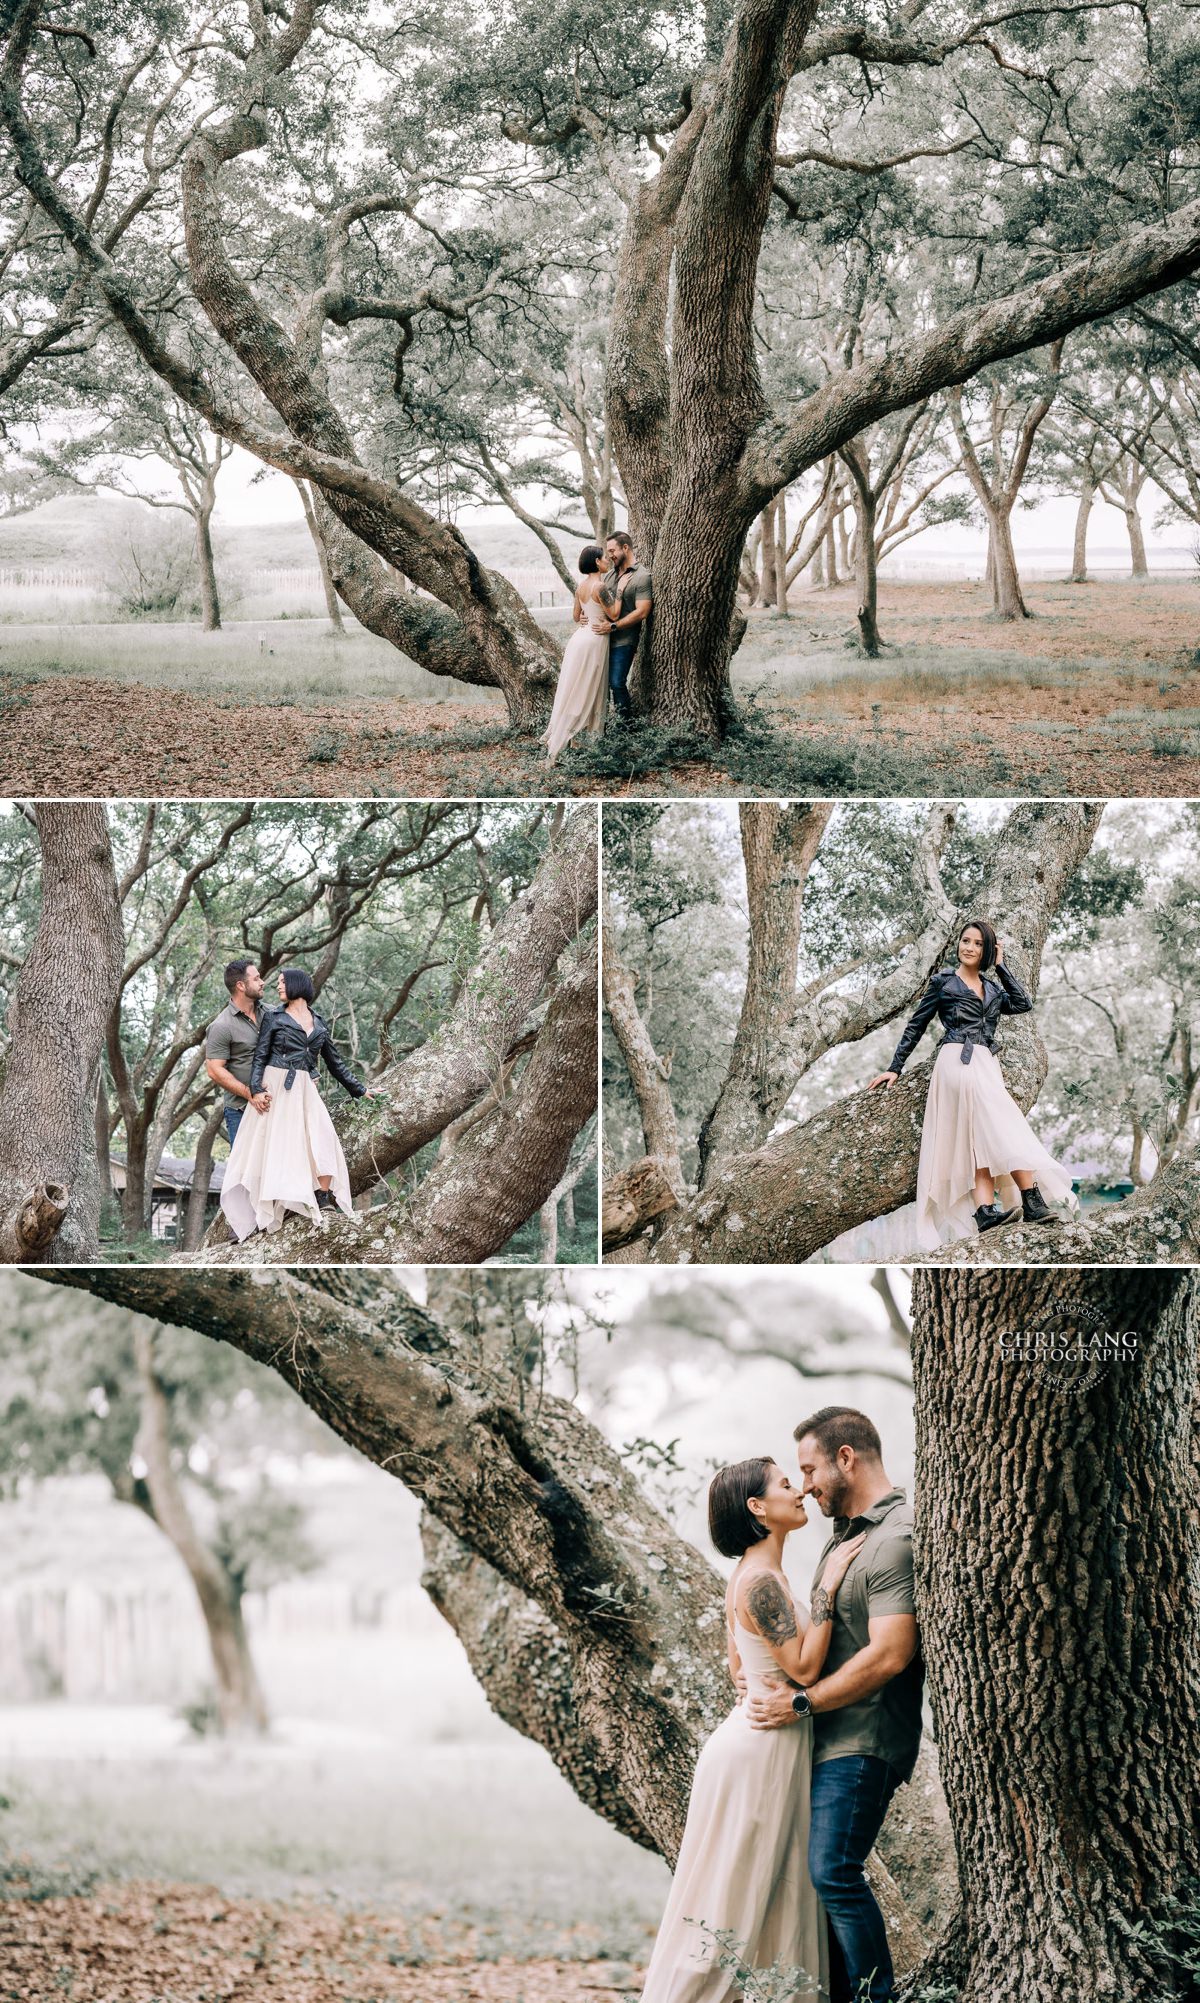 Photo of engaged couple  - oak trees - Fort Fisher - Engagement Photo -  Engagement Photography - Engagement Photography Ideas - Great Places for engagement  Photos - Chris Lang Photography -